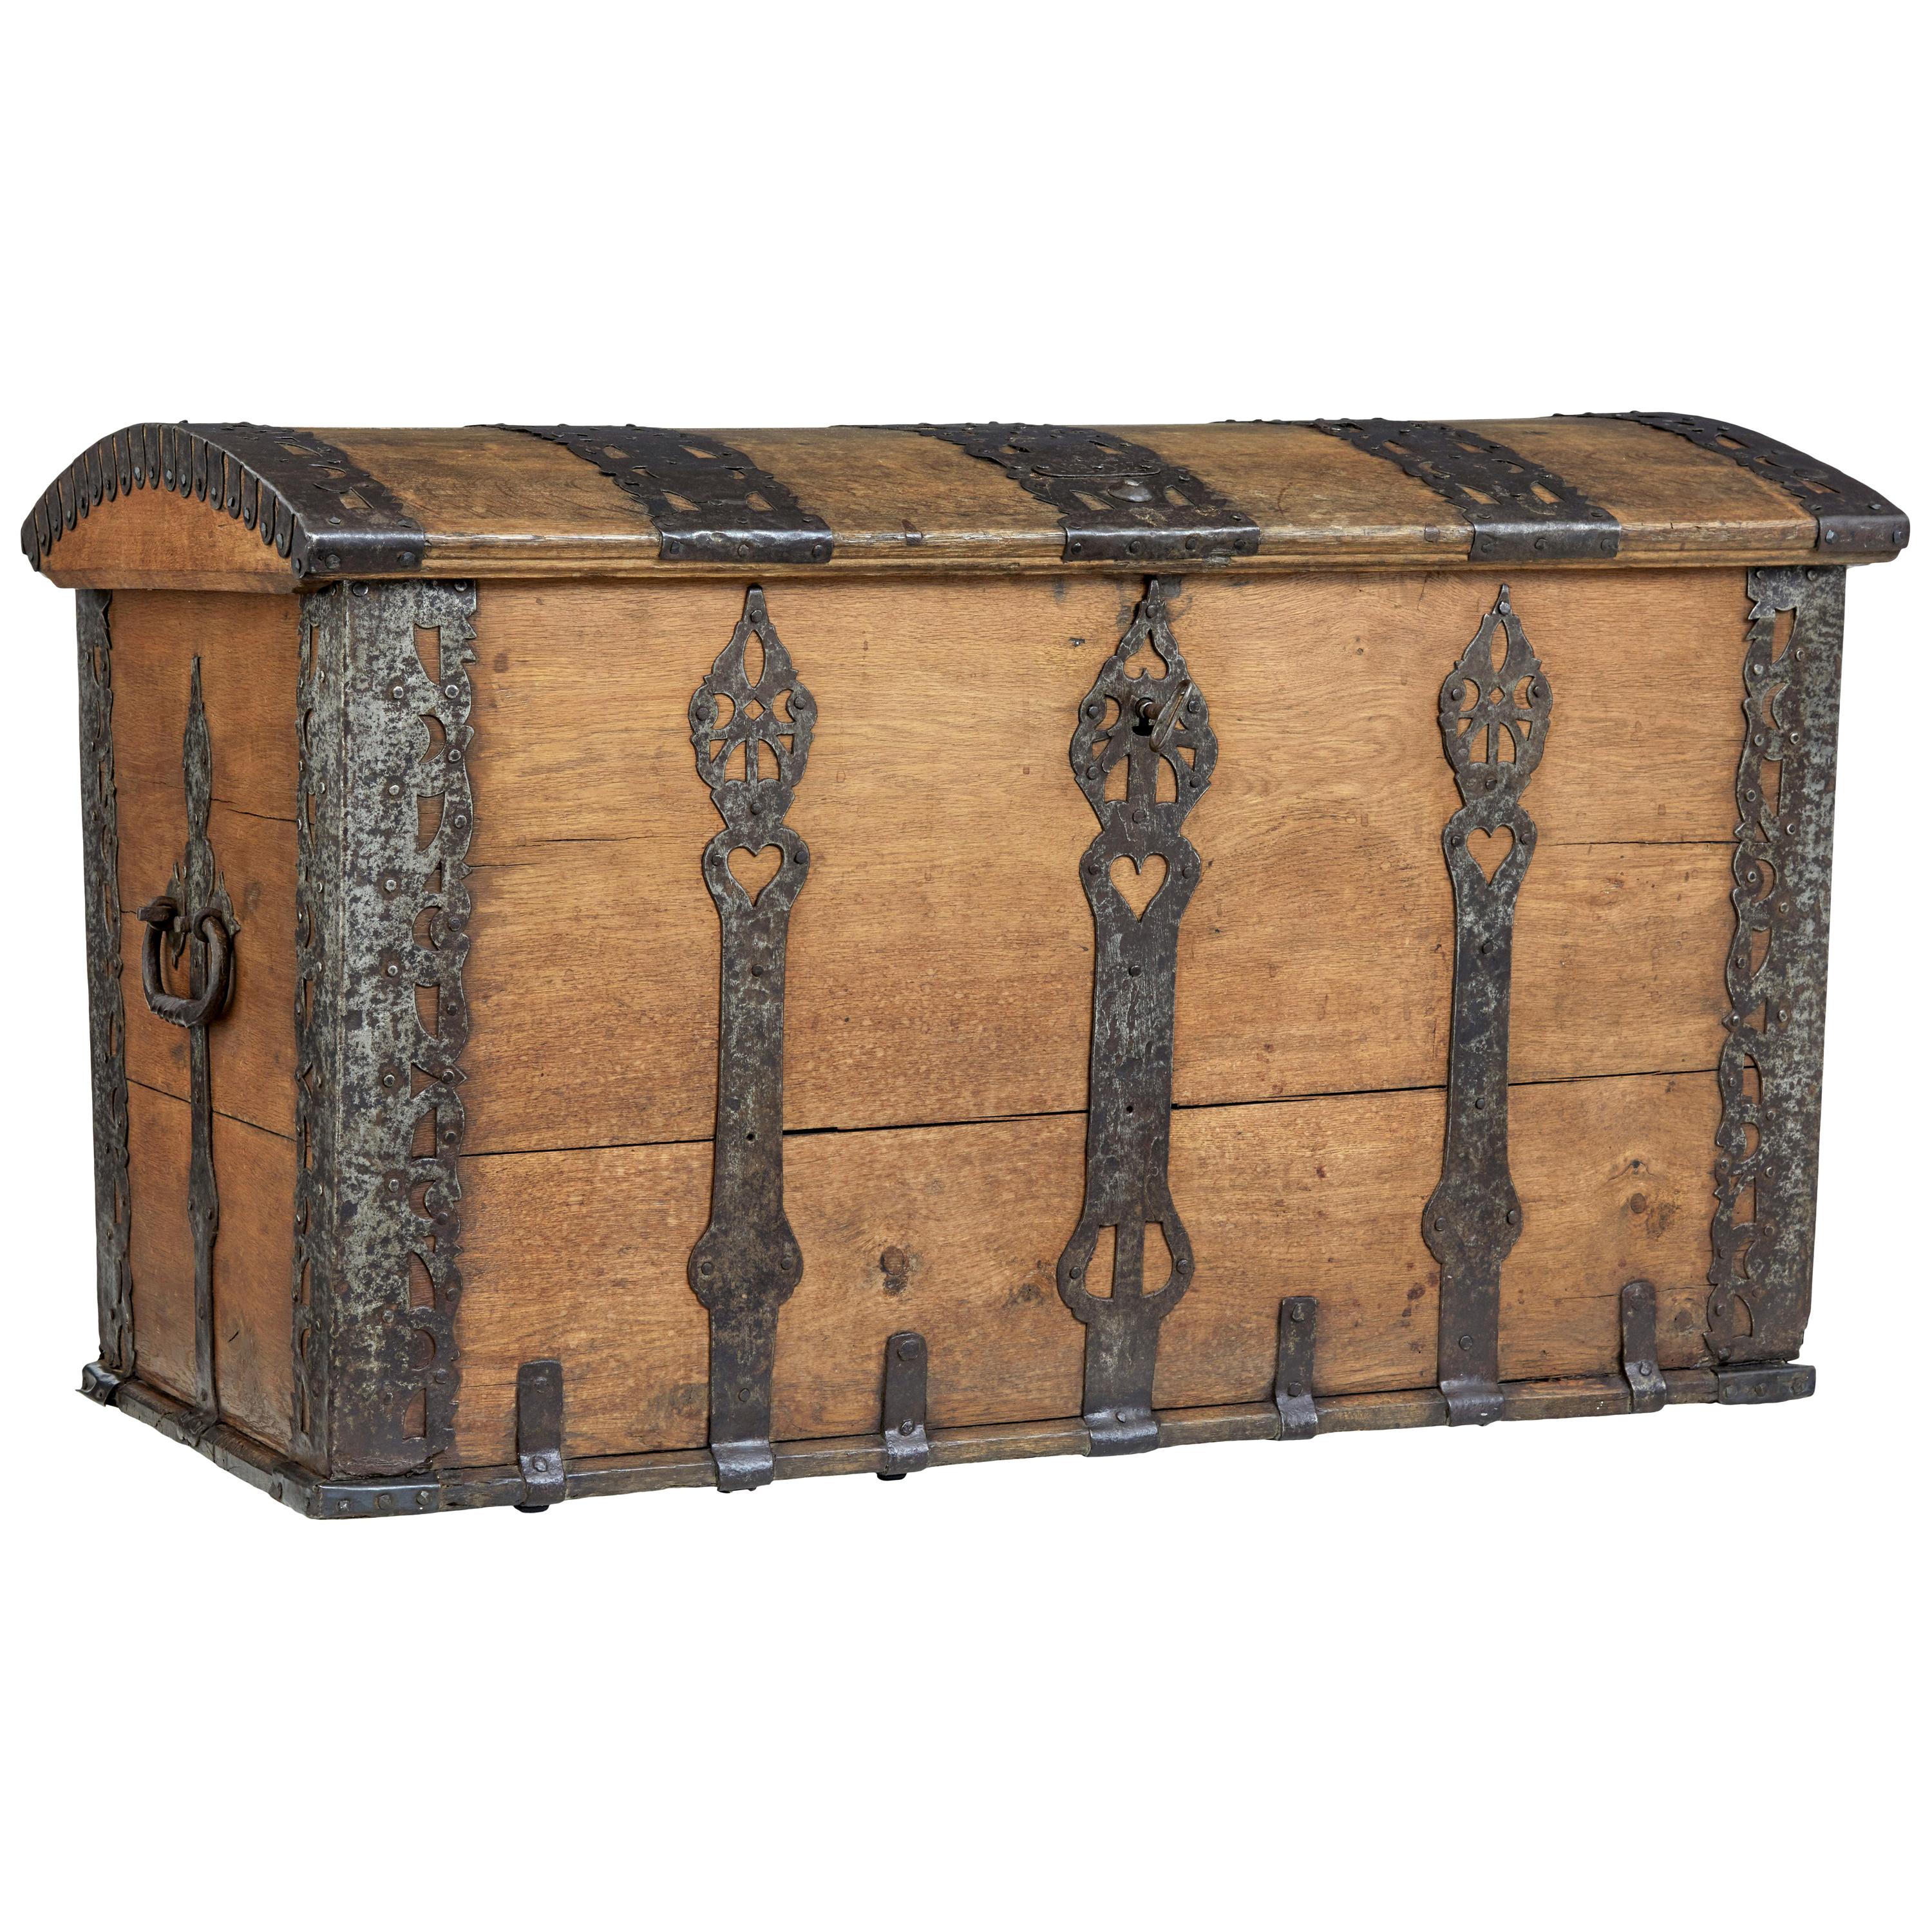 Mid 18th Century oak and iron dome top trunk